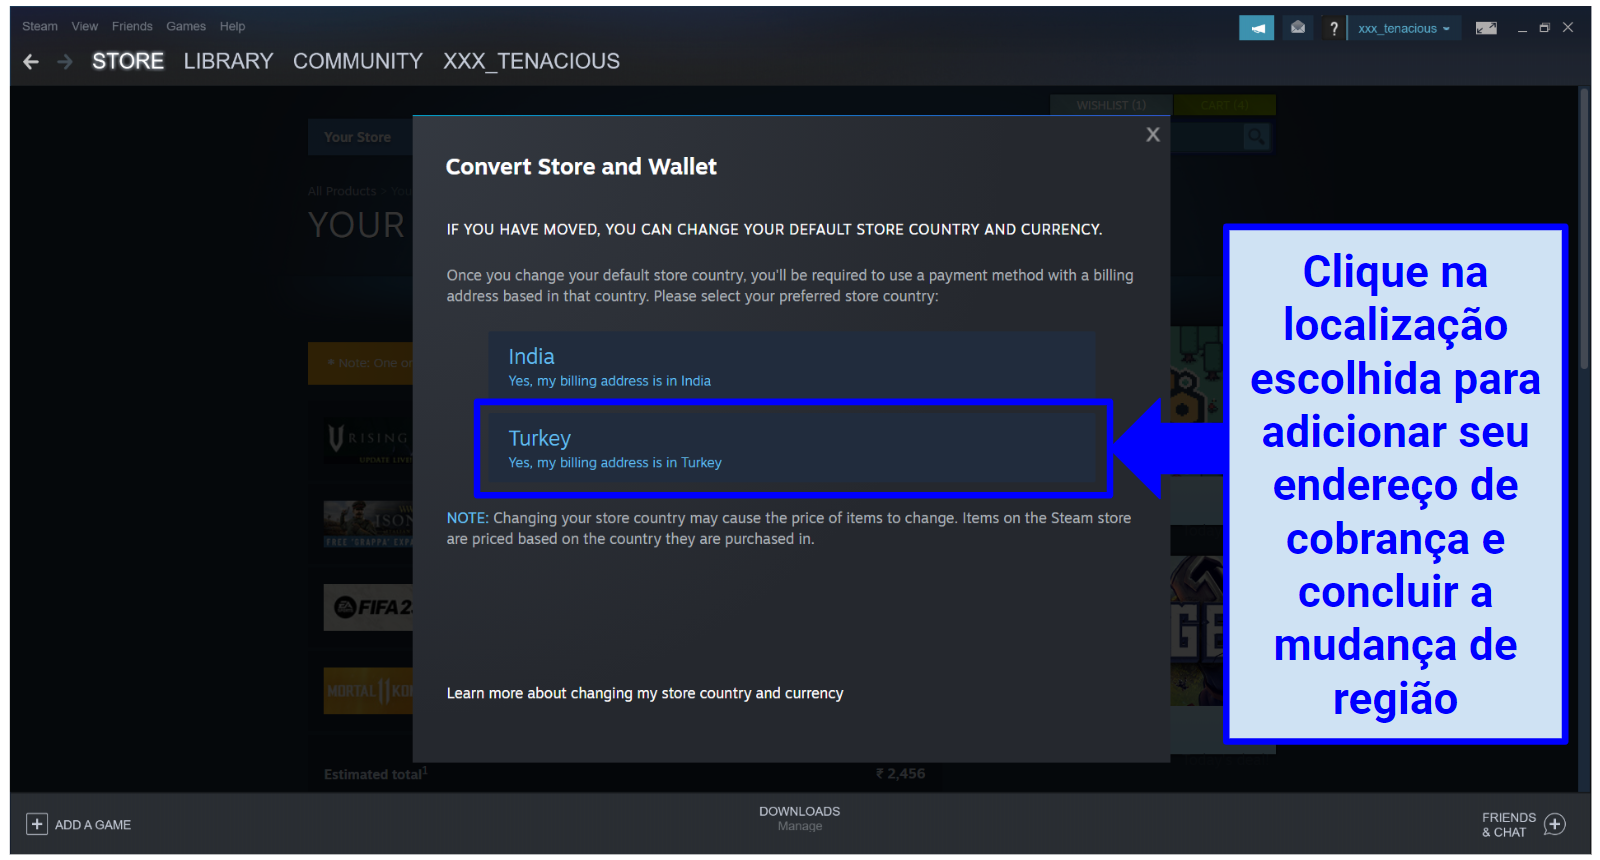 A screenshot showing that the user can click on their chosen location to input their billing address and change their region on Steam